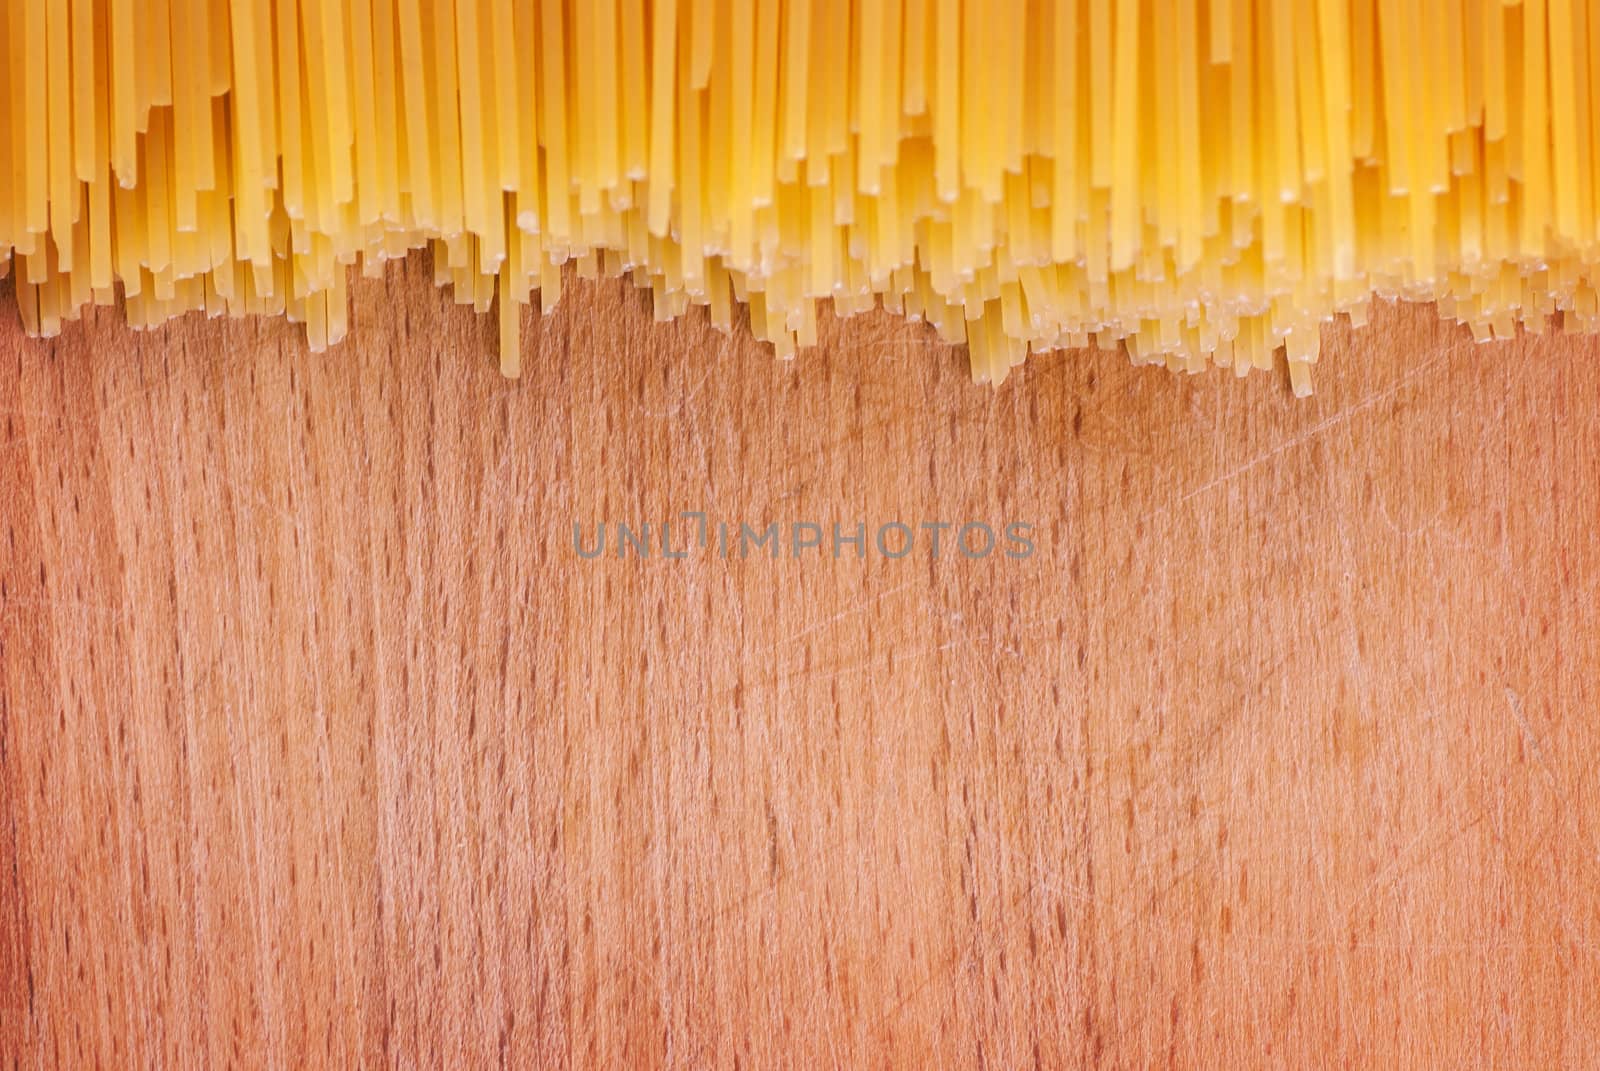 pasta on a wooden board, background by Zhukow